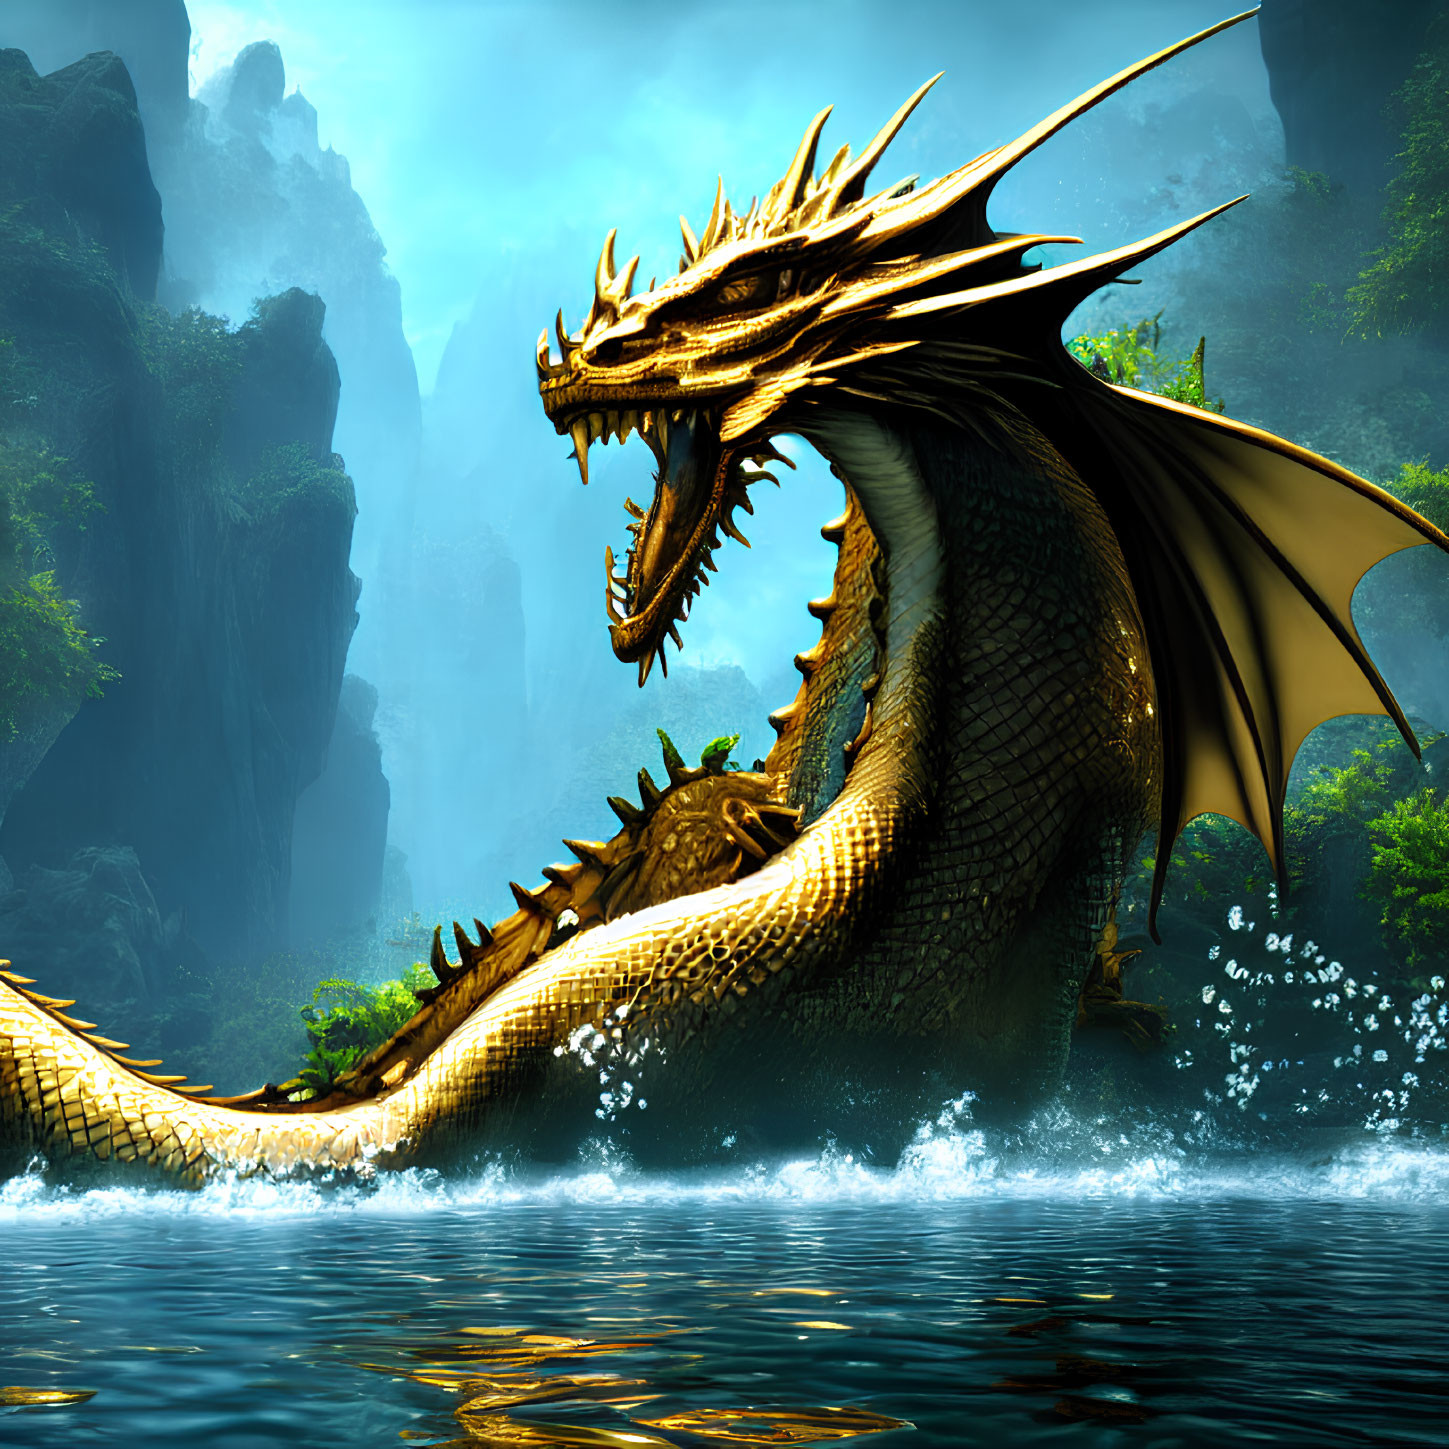 Golden dragon emerging from misty blue lake with green cliffs